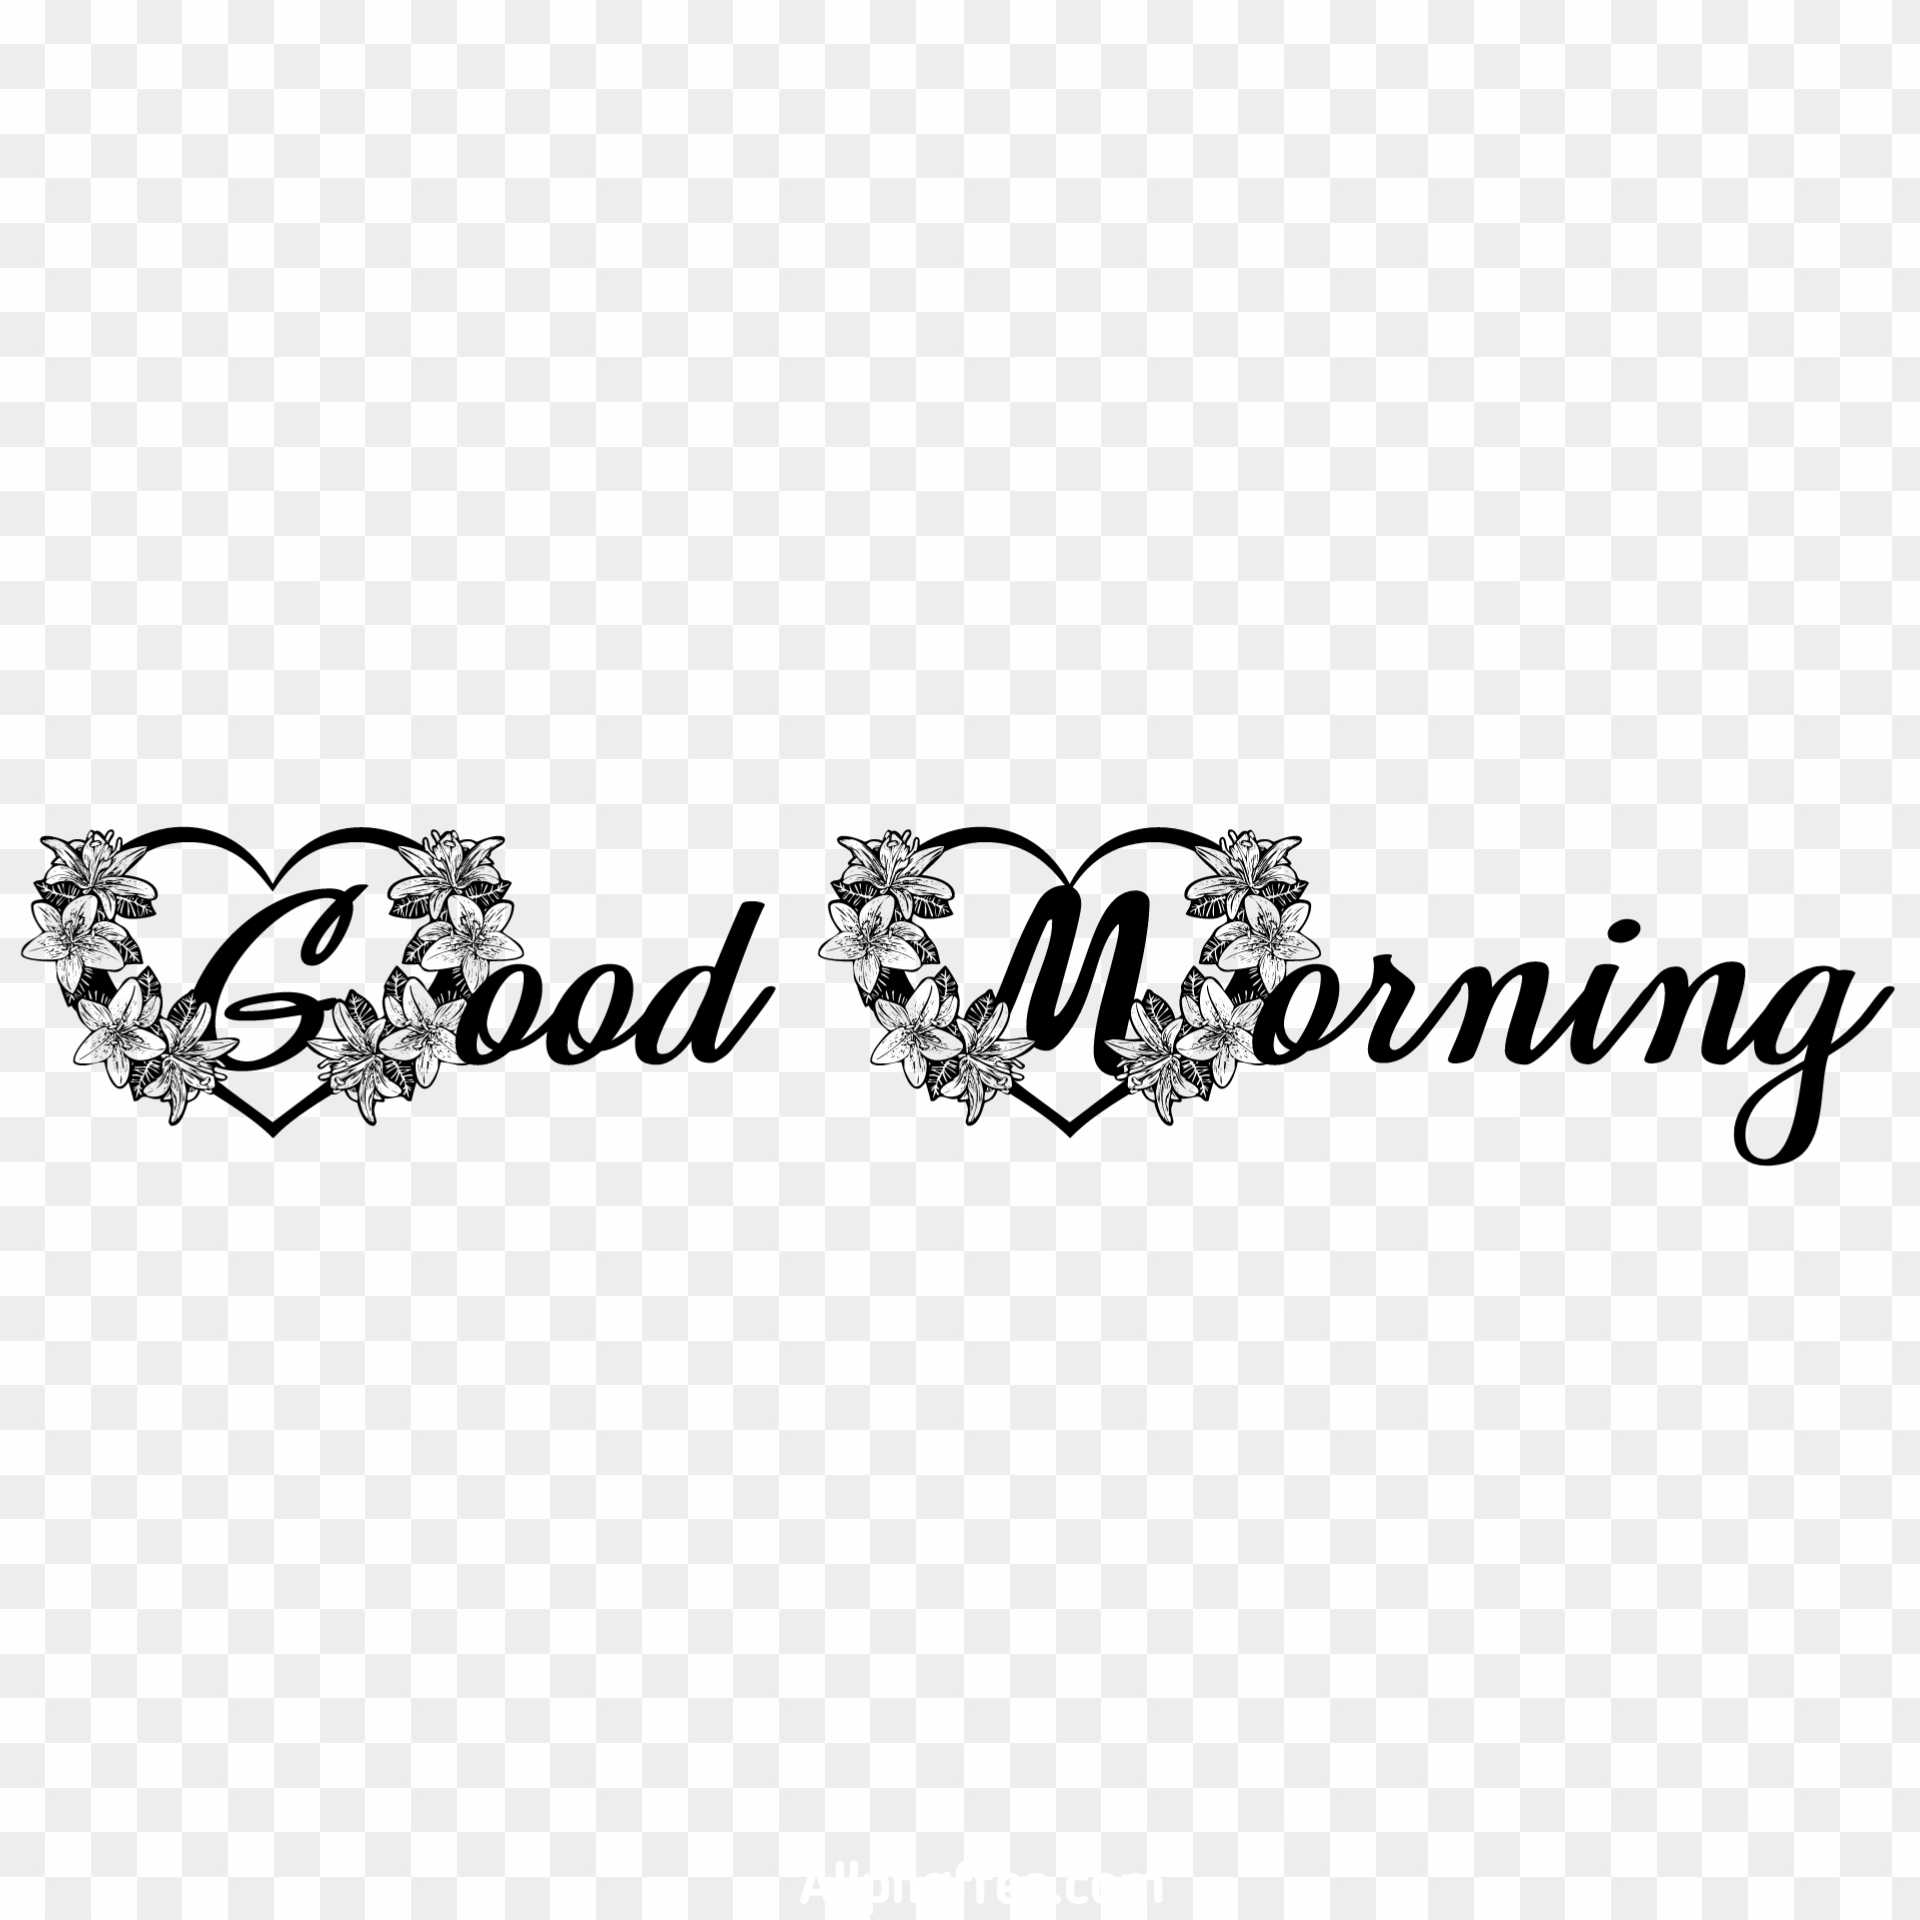 Good morning free PNG images download